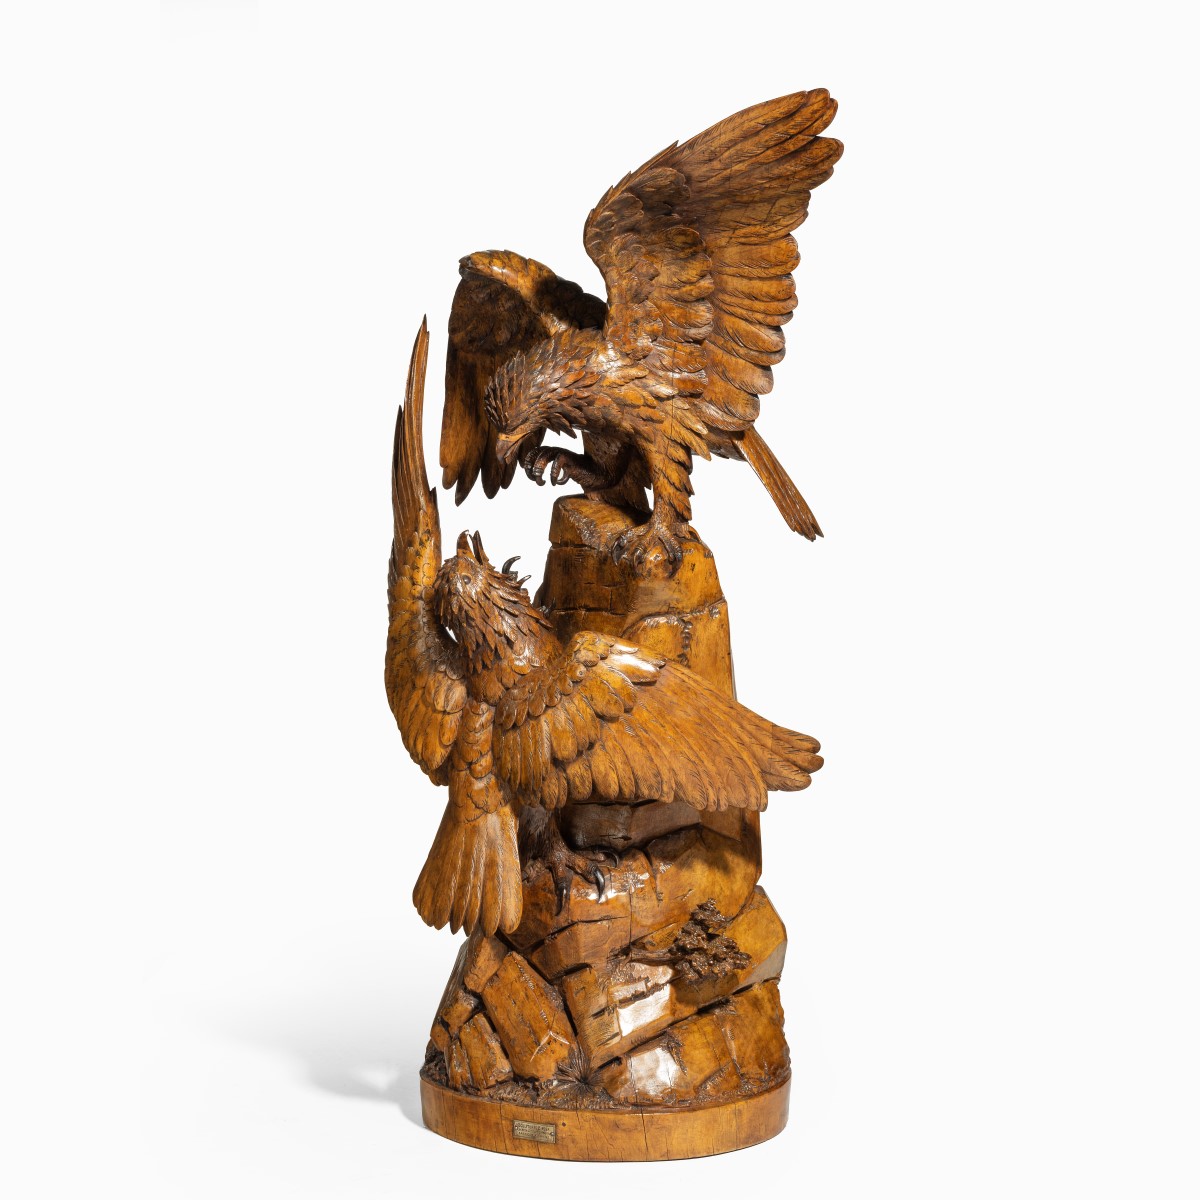 A ‘Black Forest’ carving of two quarrelling golden eagles